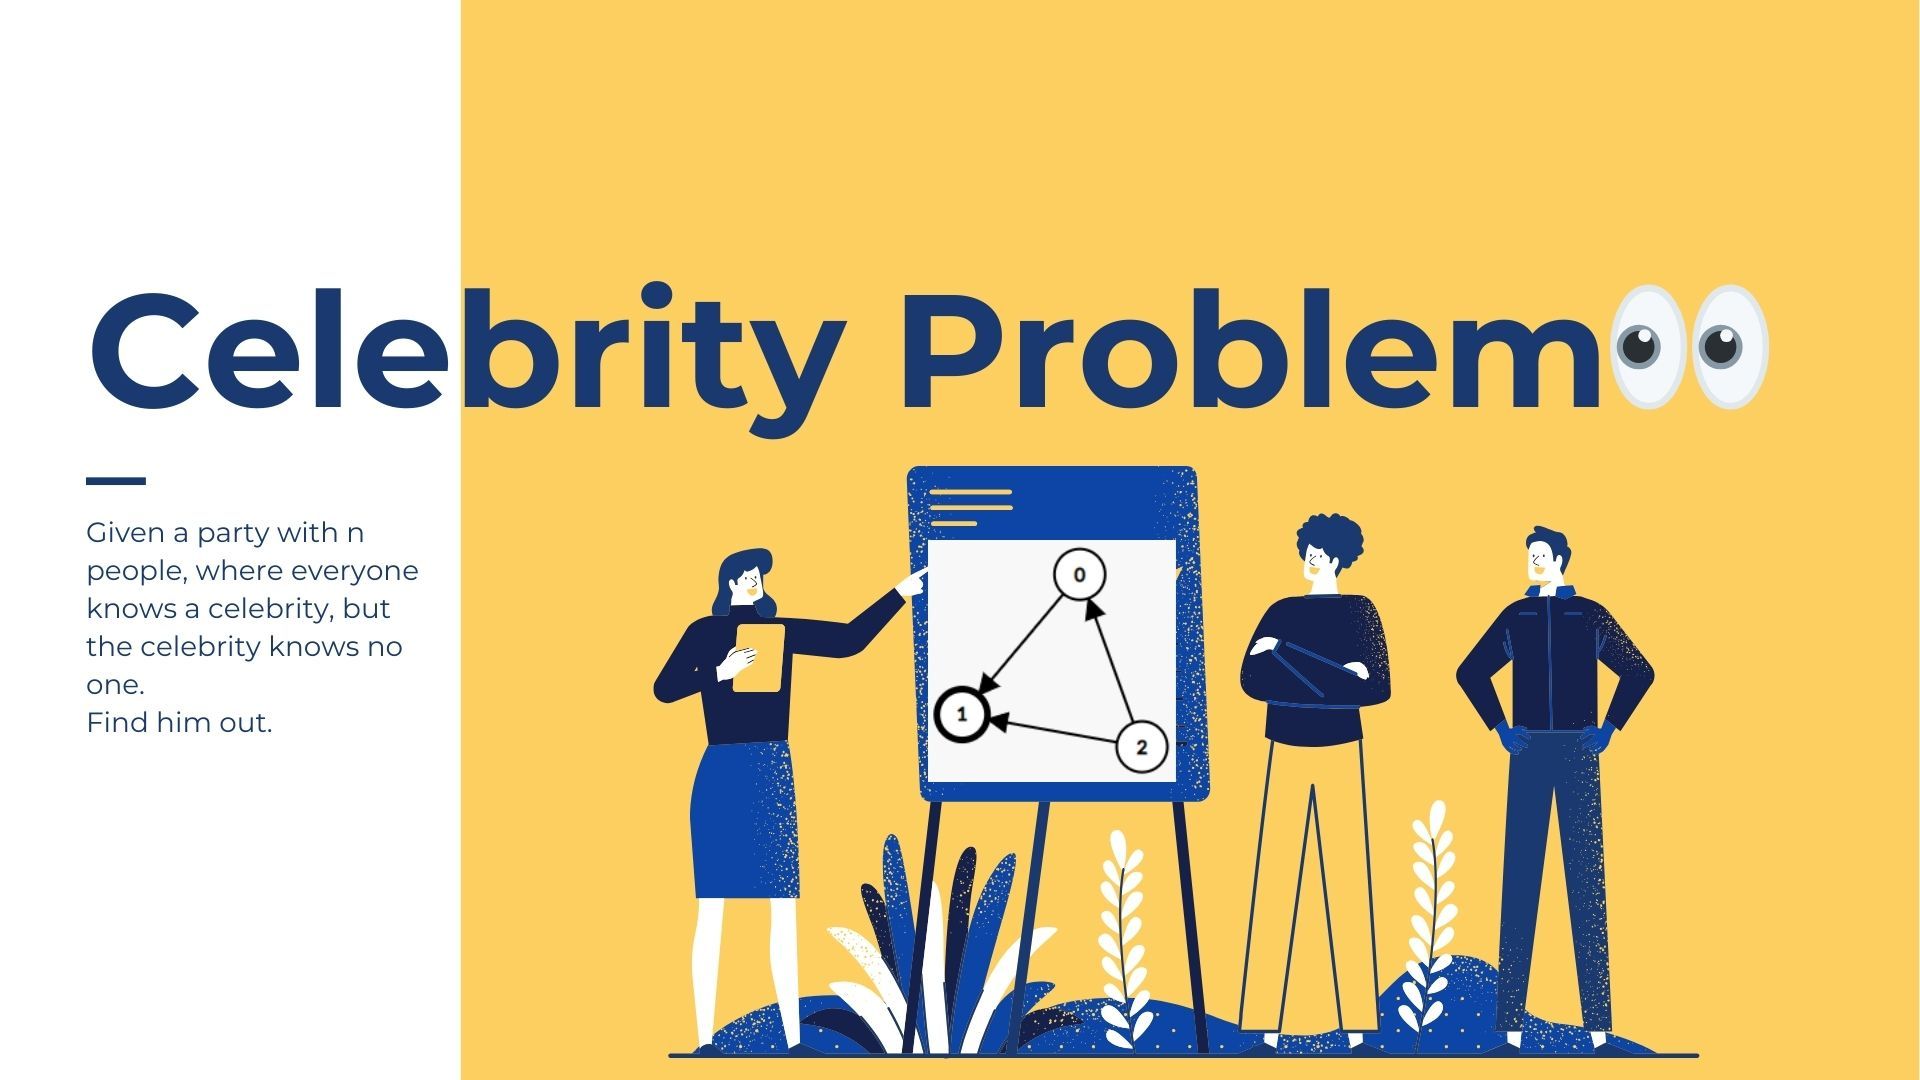 Unraveling the Celebrity Problem: A Solution Using Stacks